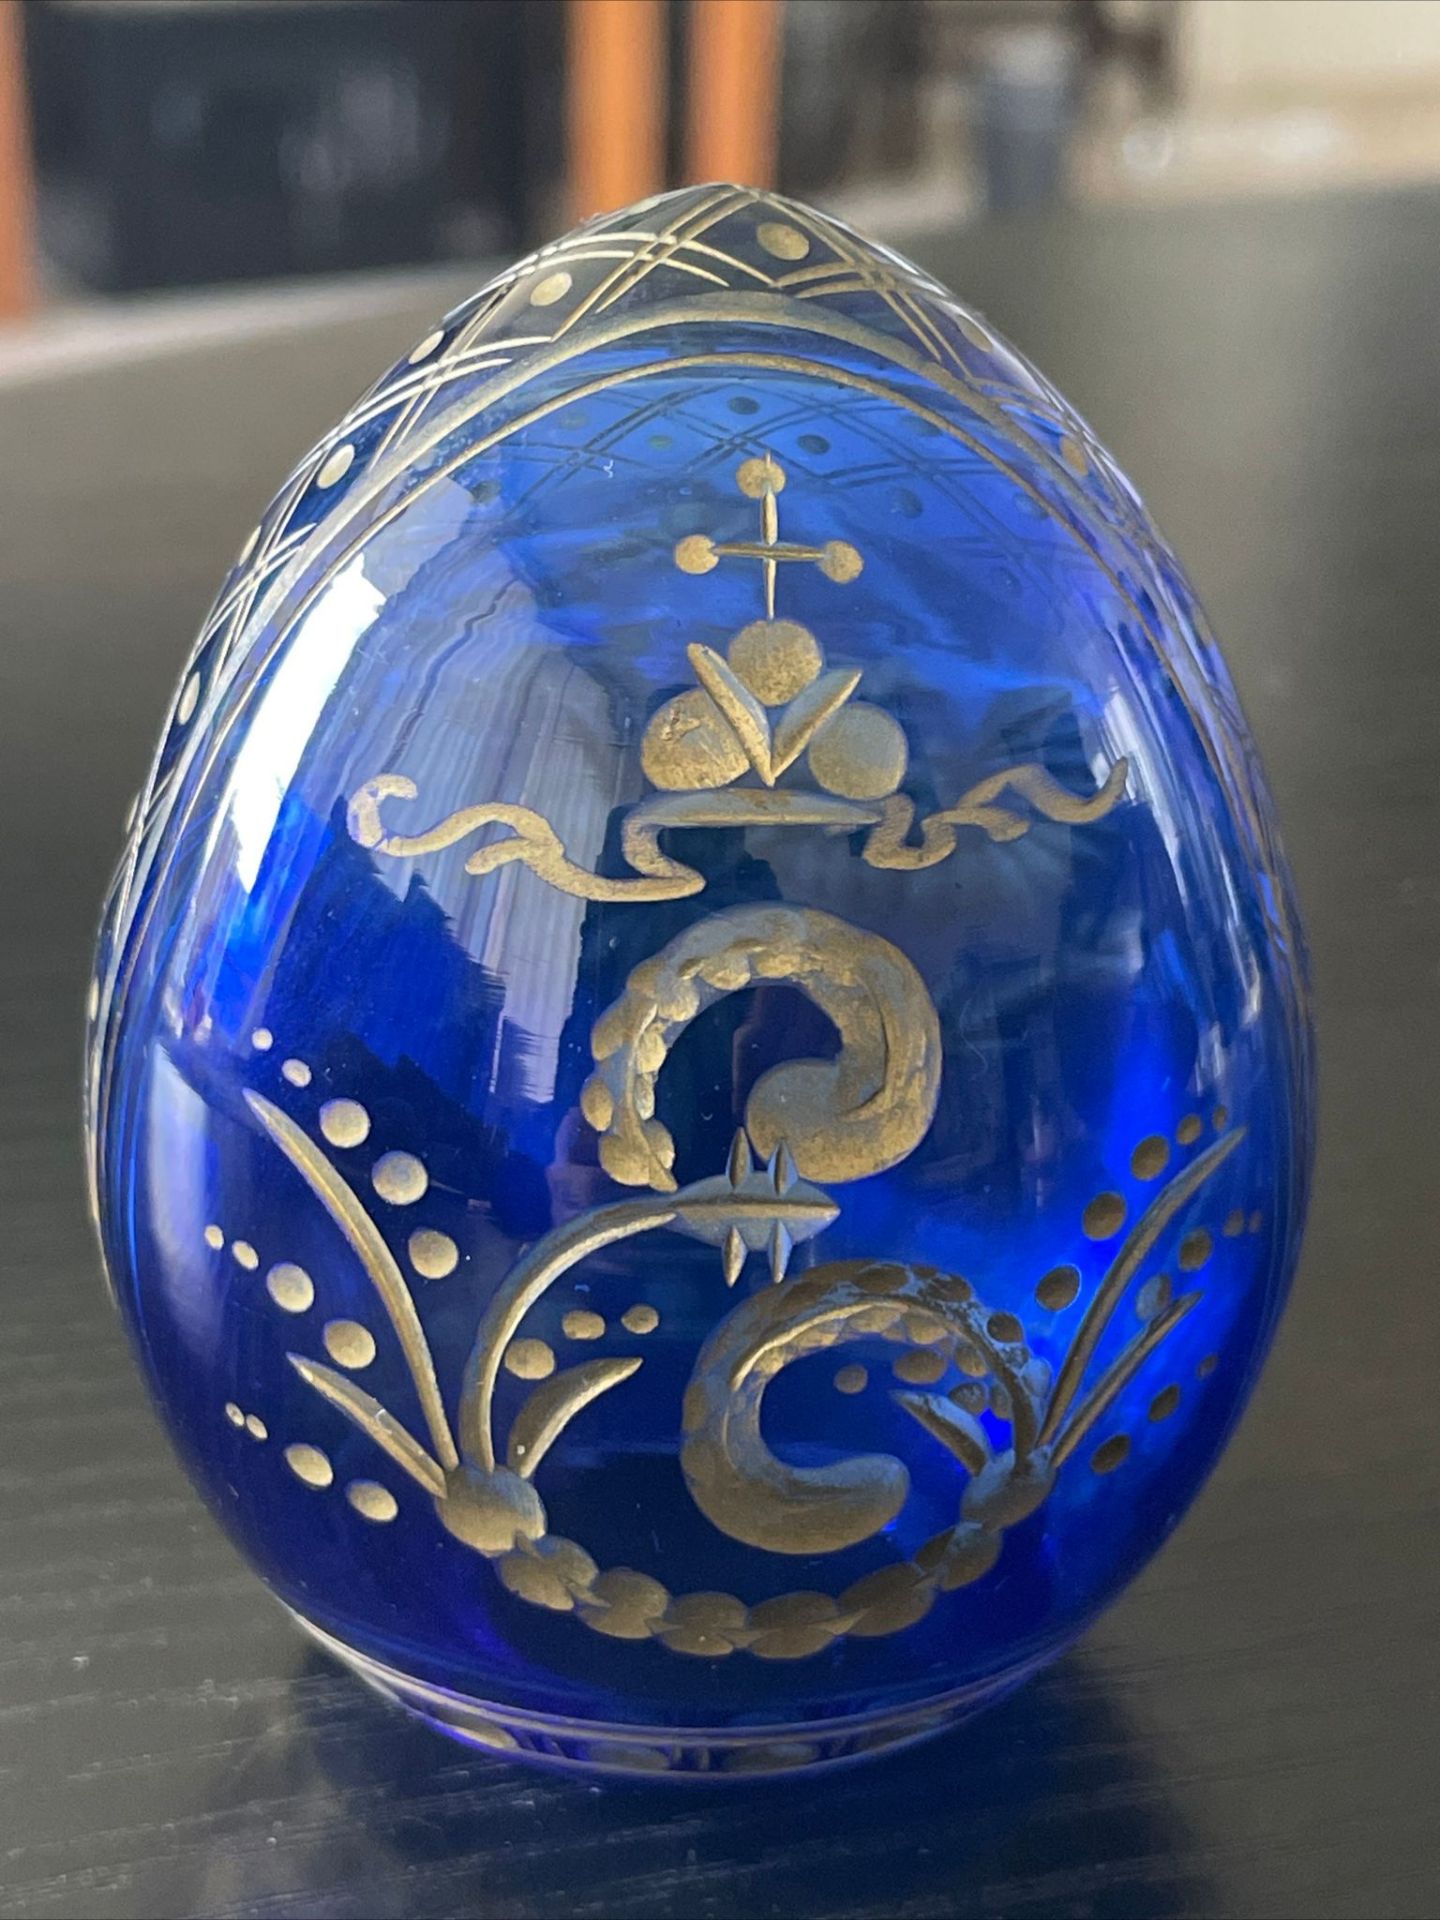 FABERGE STYLE RUSSIAN BLUE GLASS EGG IN EXCELLENT CONDITION - Image 2 of 4